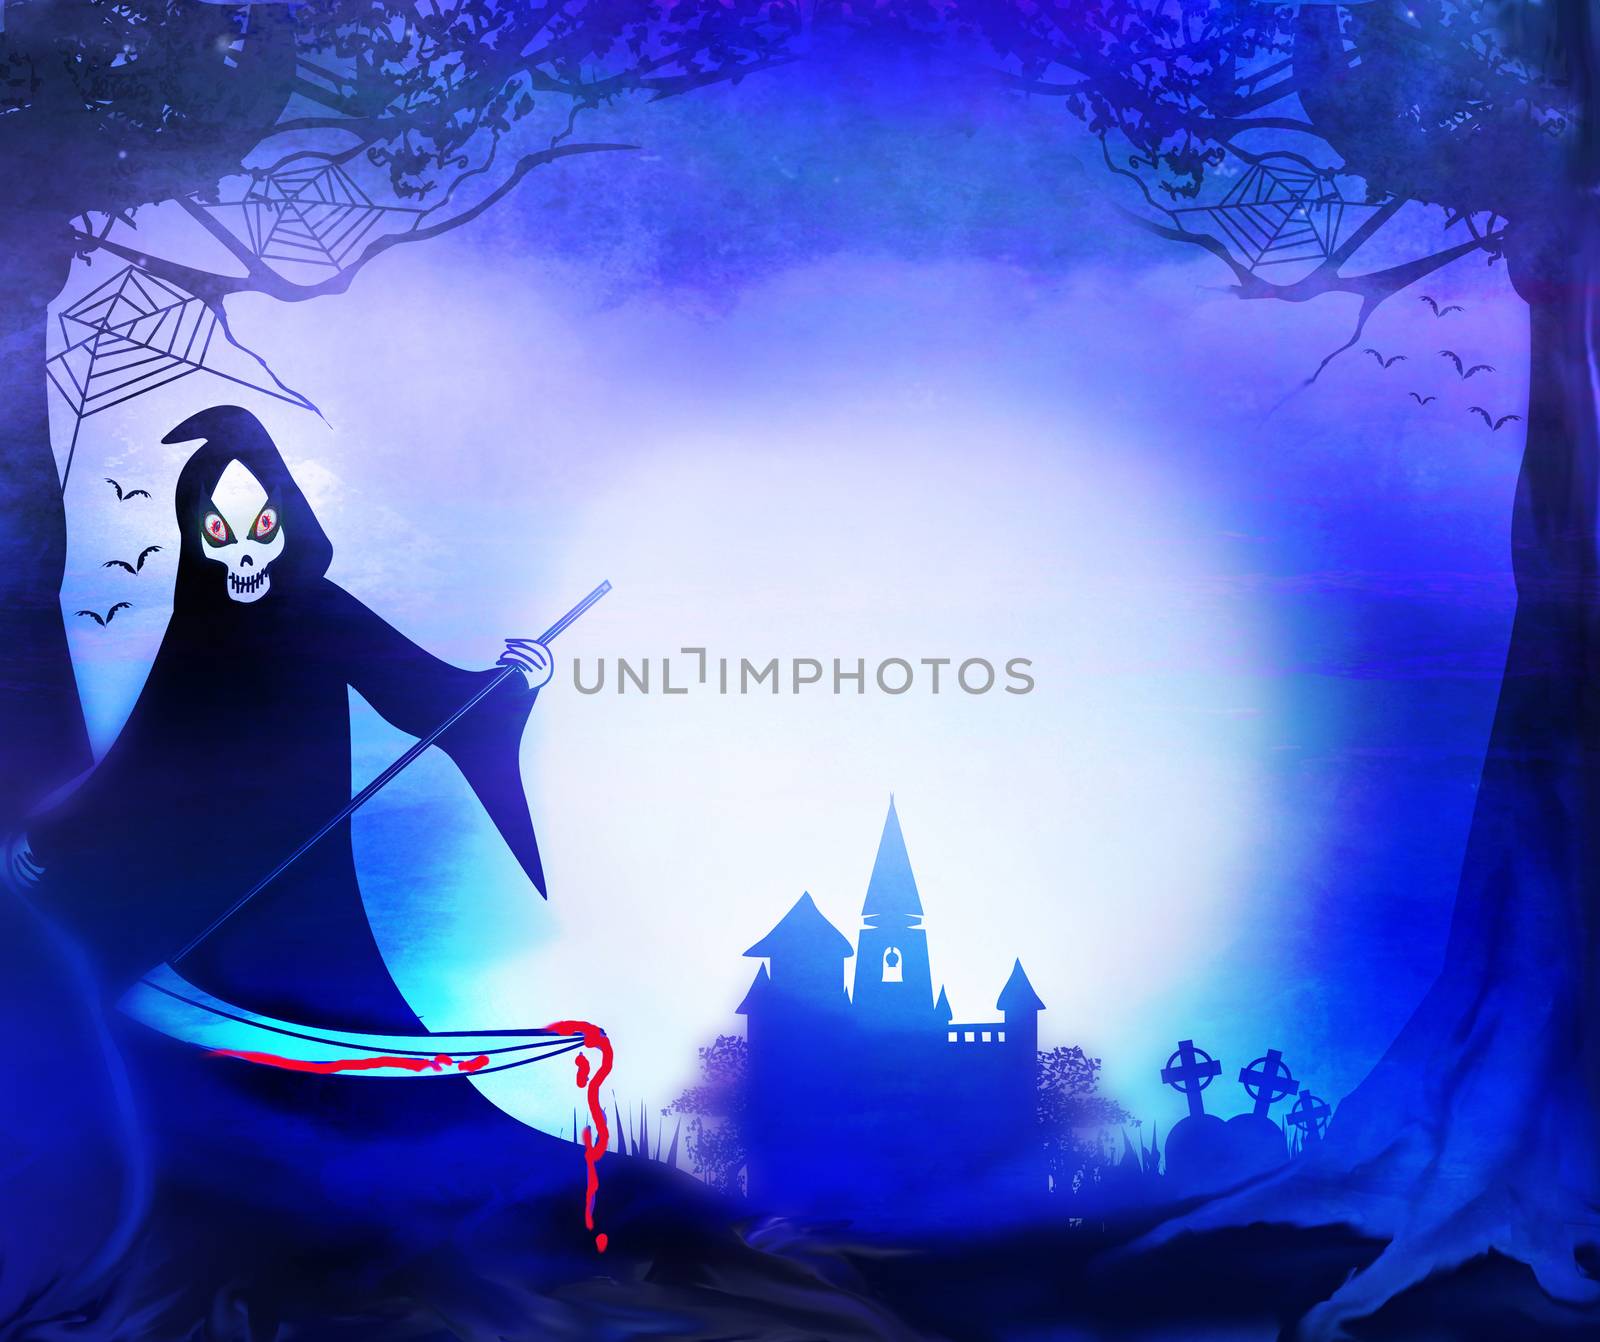 Grim reaper and the haunted castle - Halloween party poster